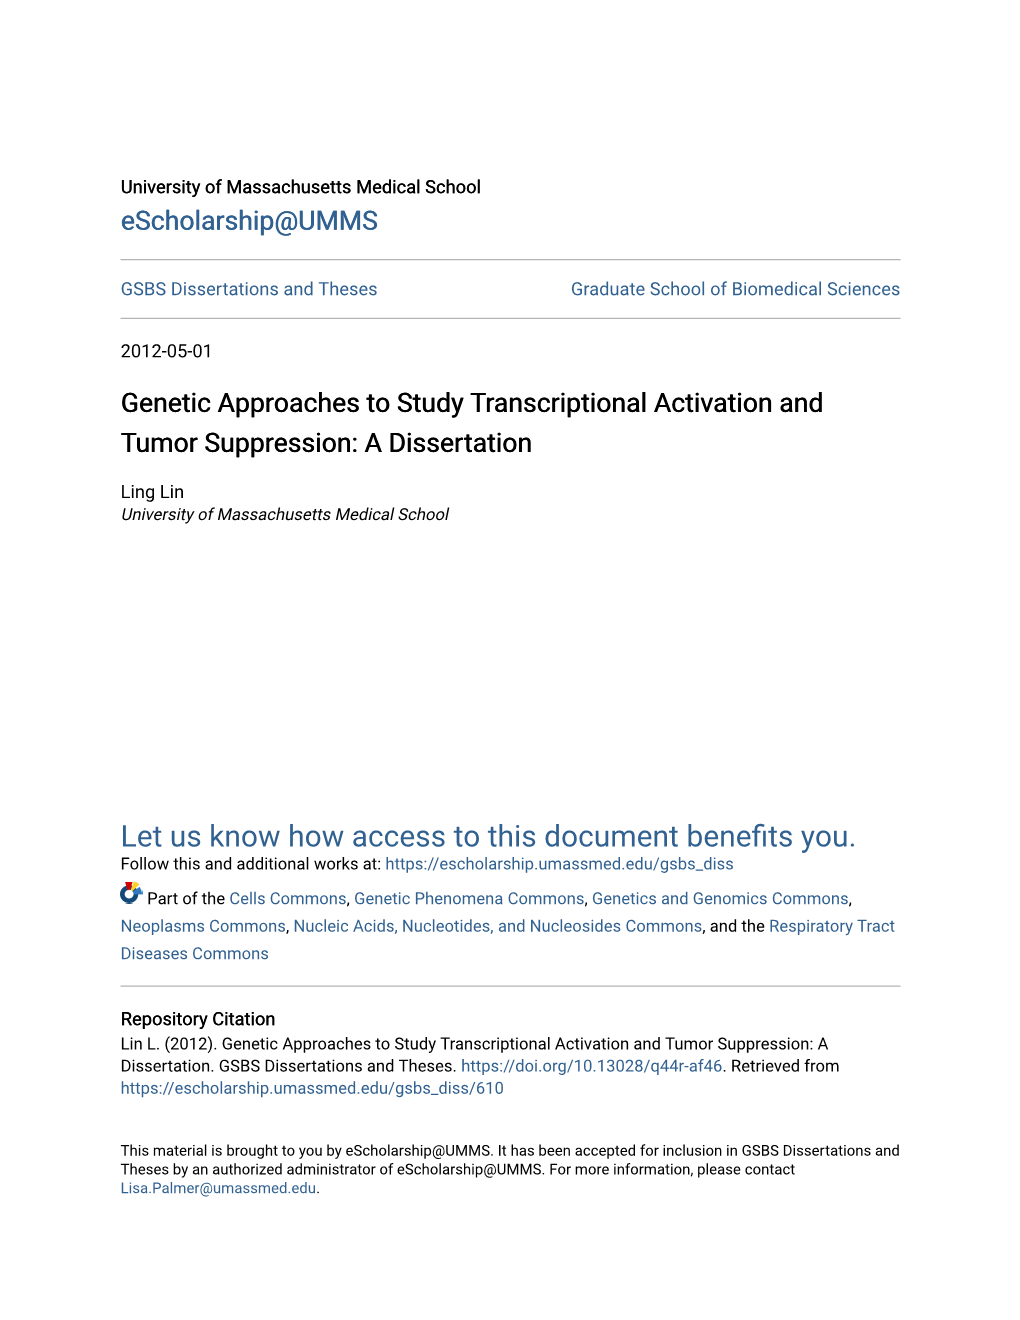 Genetic Approaches to Study Transcriptional Activation and Tumor Suppression: a Dissertation